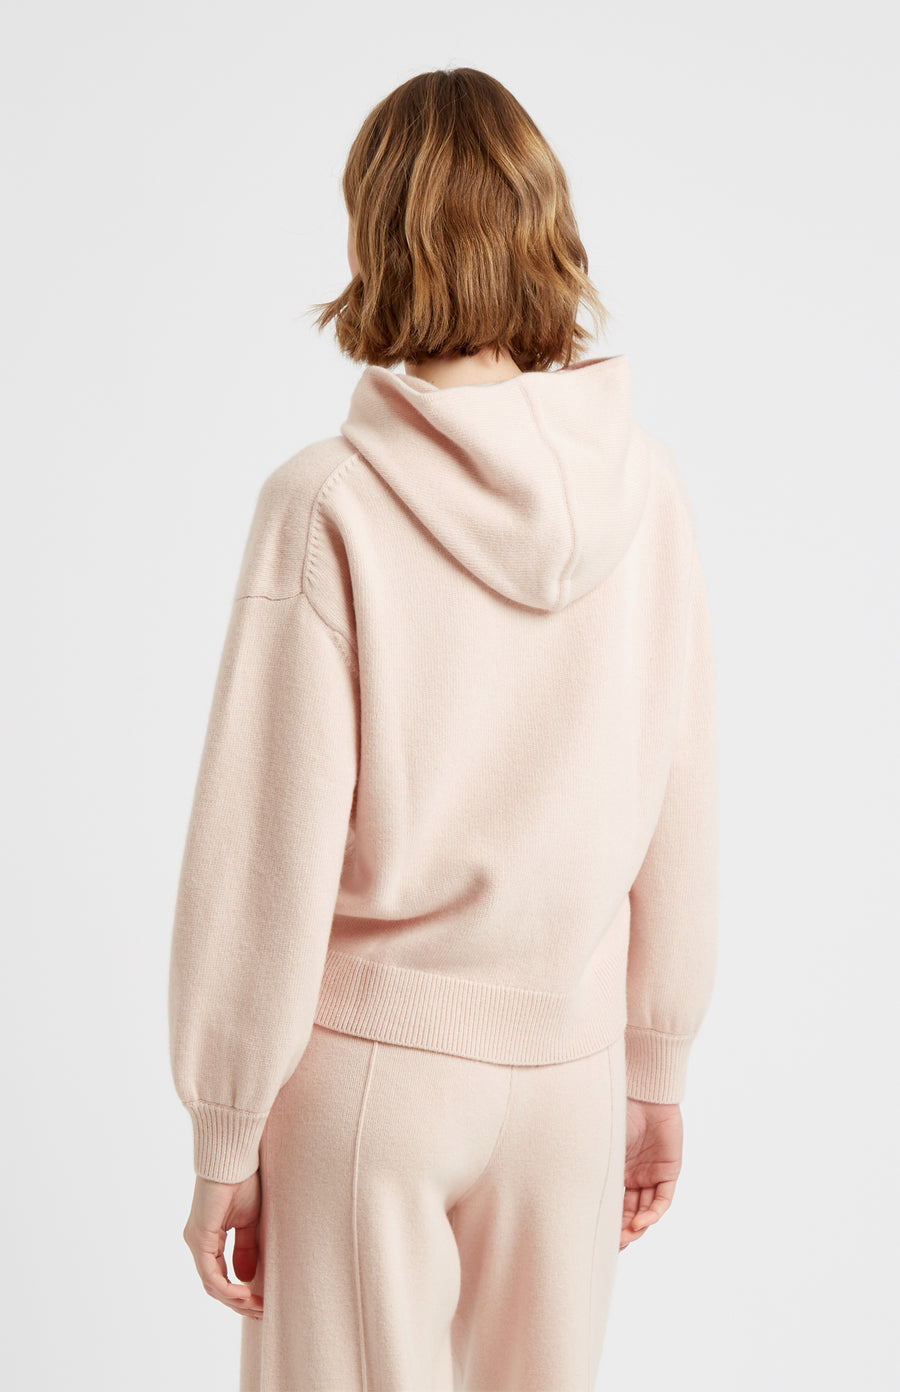 Pringle of Scotland Women's Cashmere Blend Hoodie In Pink Champagne rear view